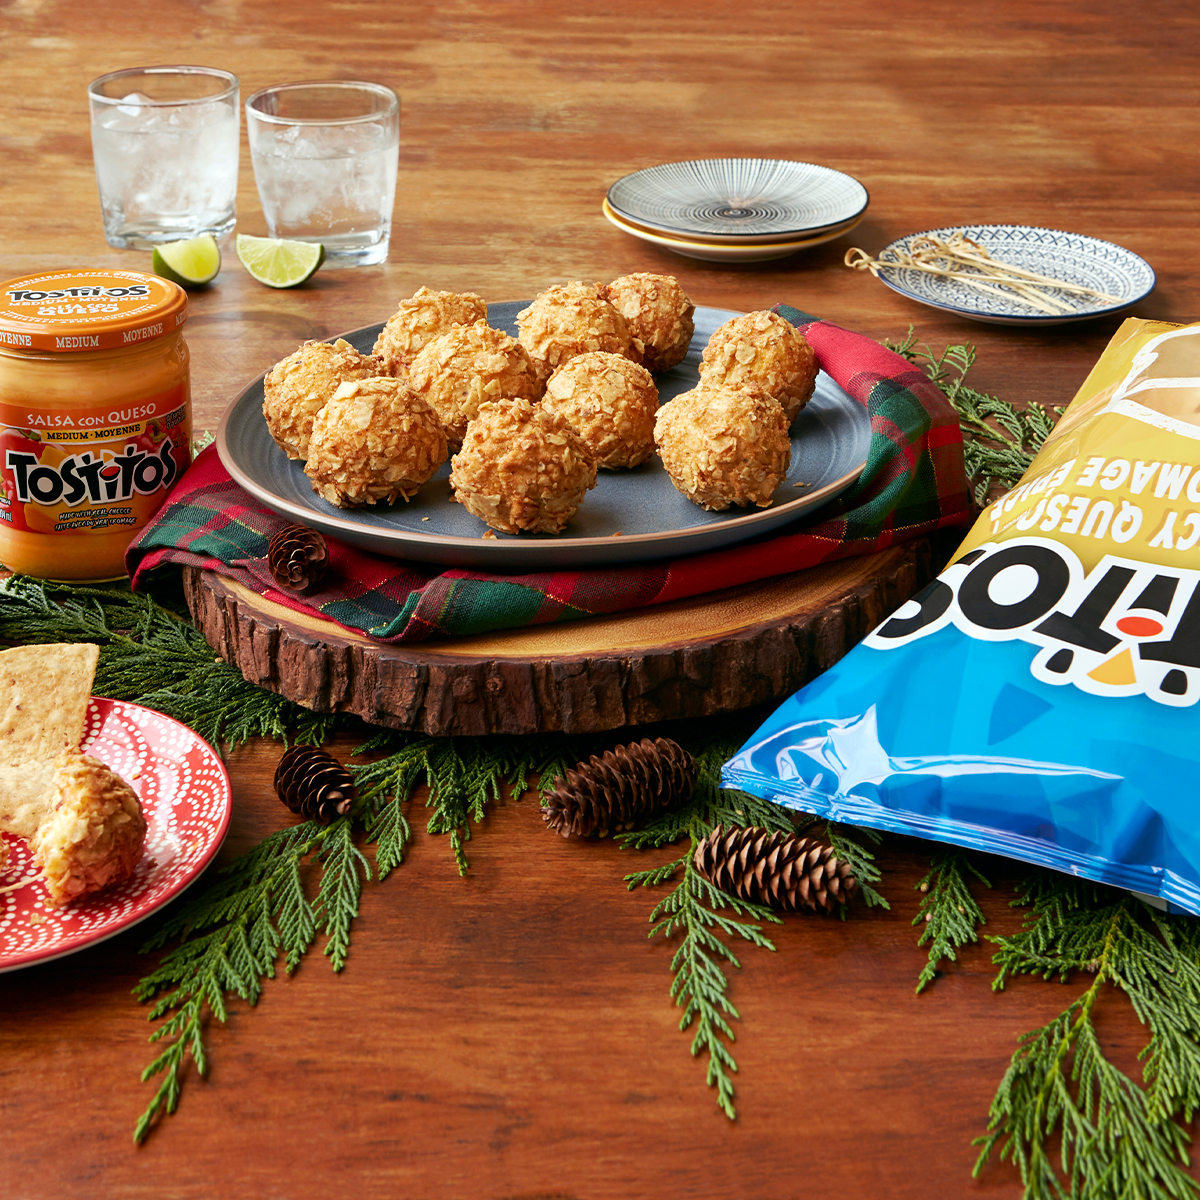 Tostitos<sup>®</sup> Cheese Balls